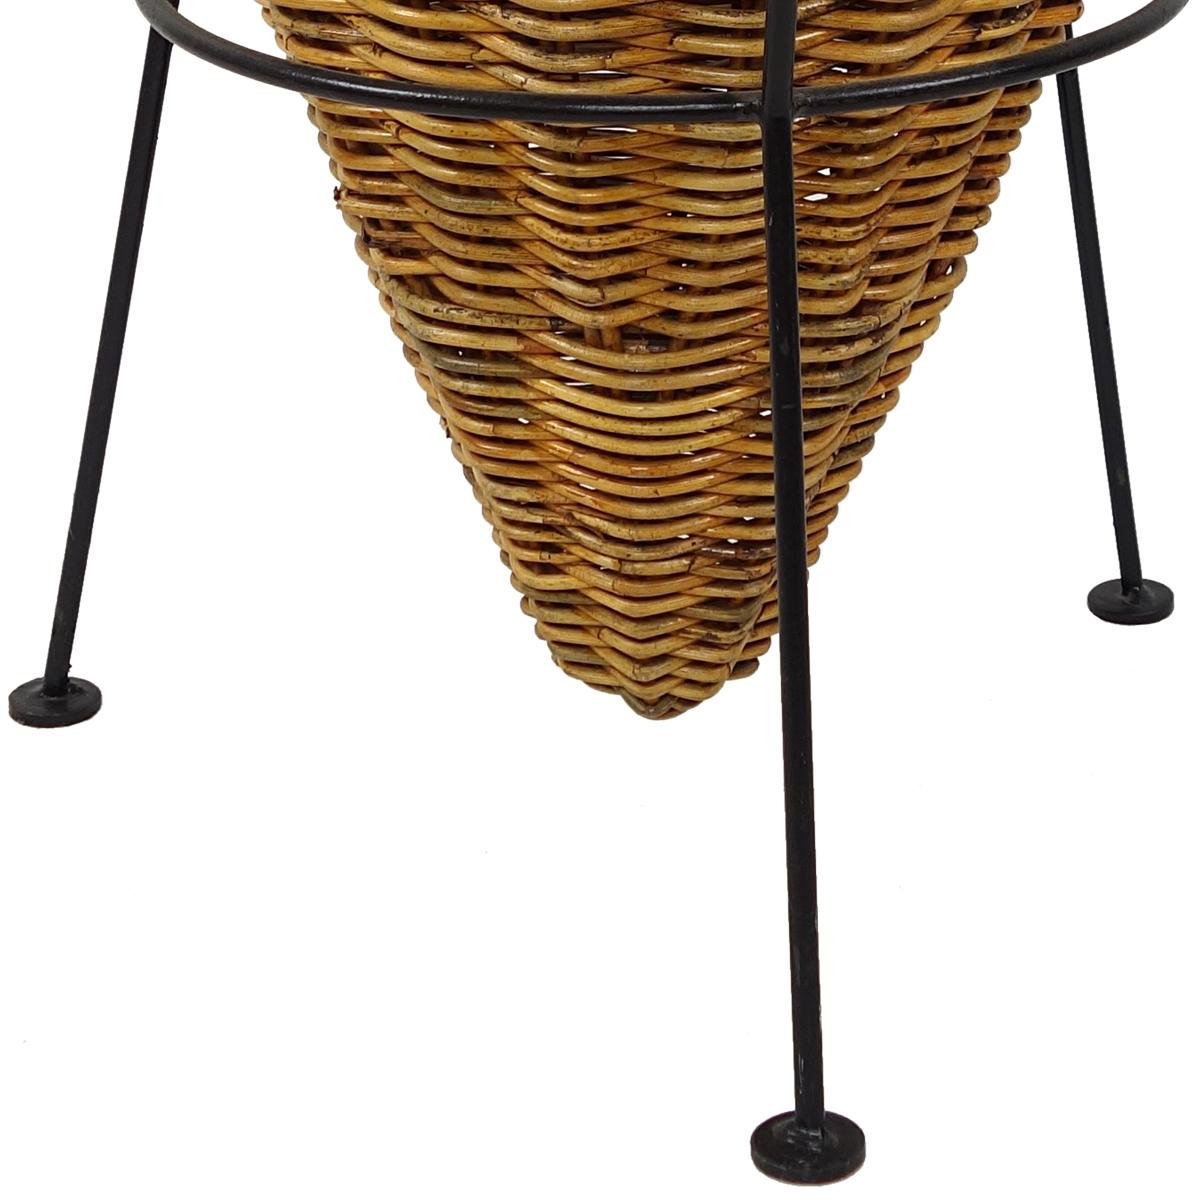 Mid-Century Modern Set of 3 Large 1950s Wicker Baskets Sitting on a Black Metal Frame For Sale